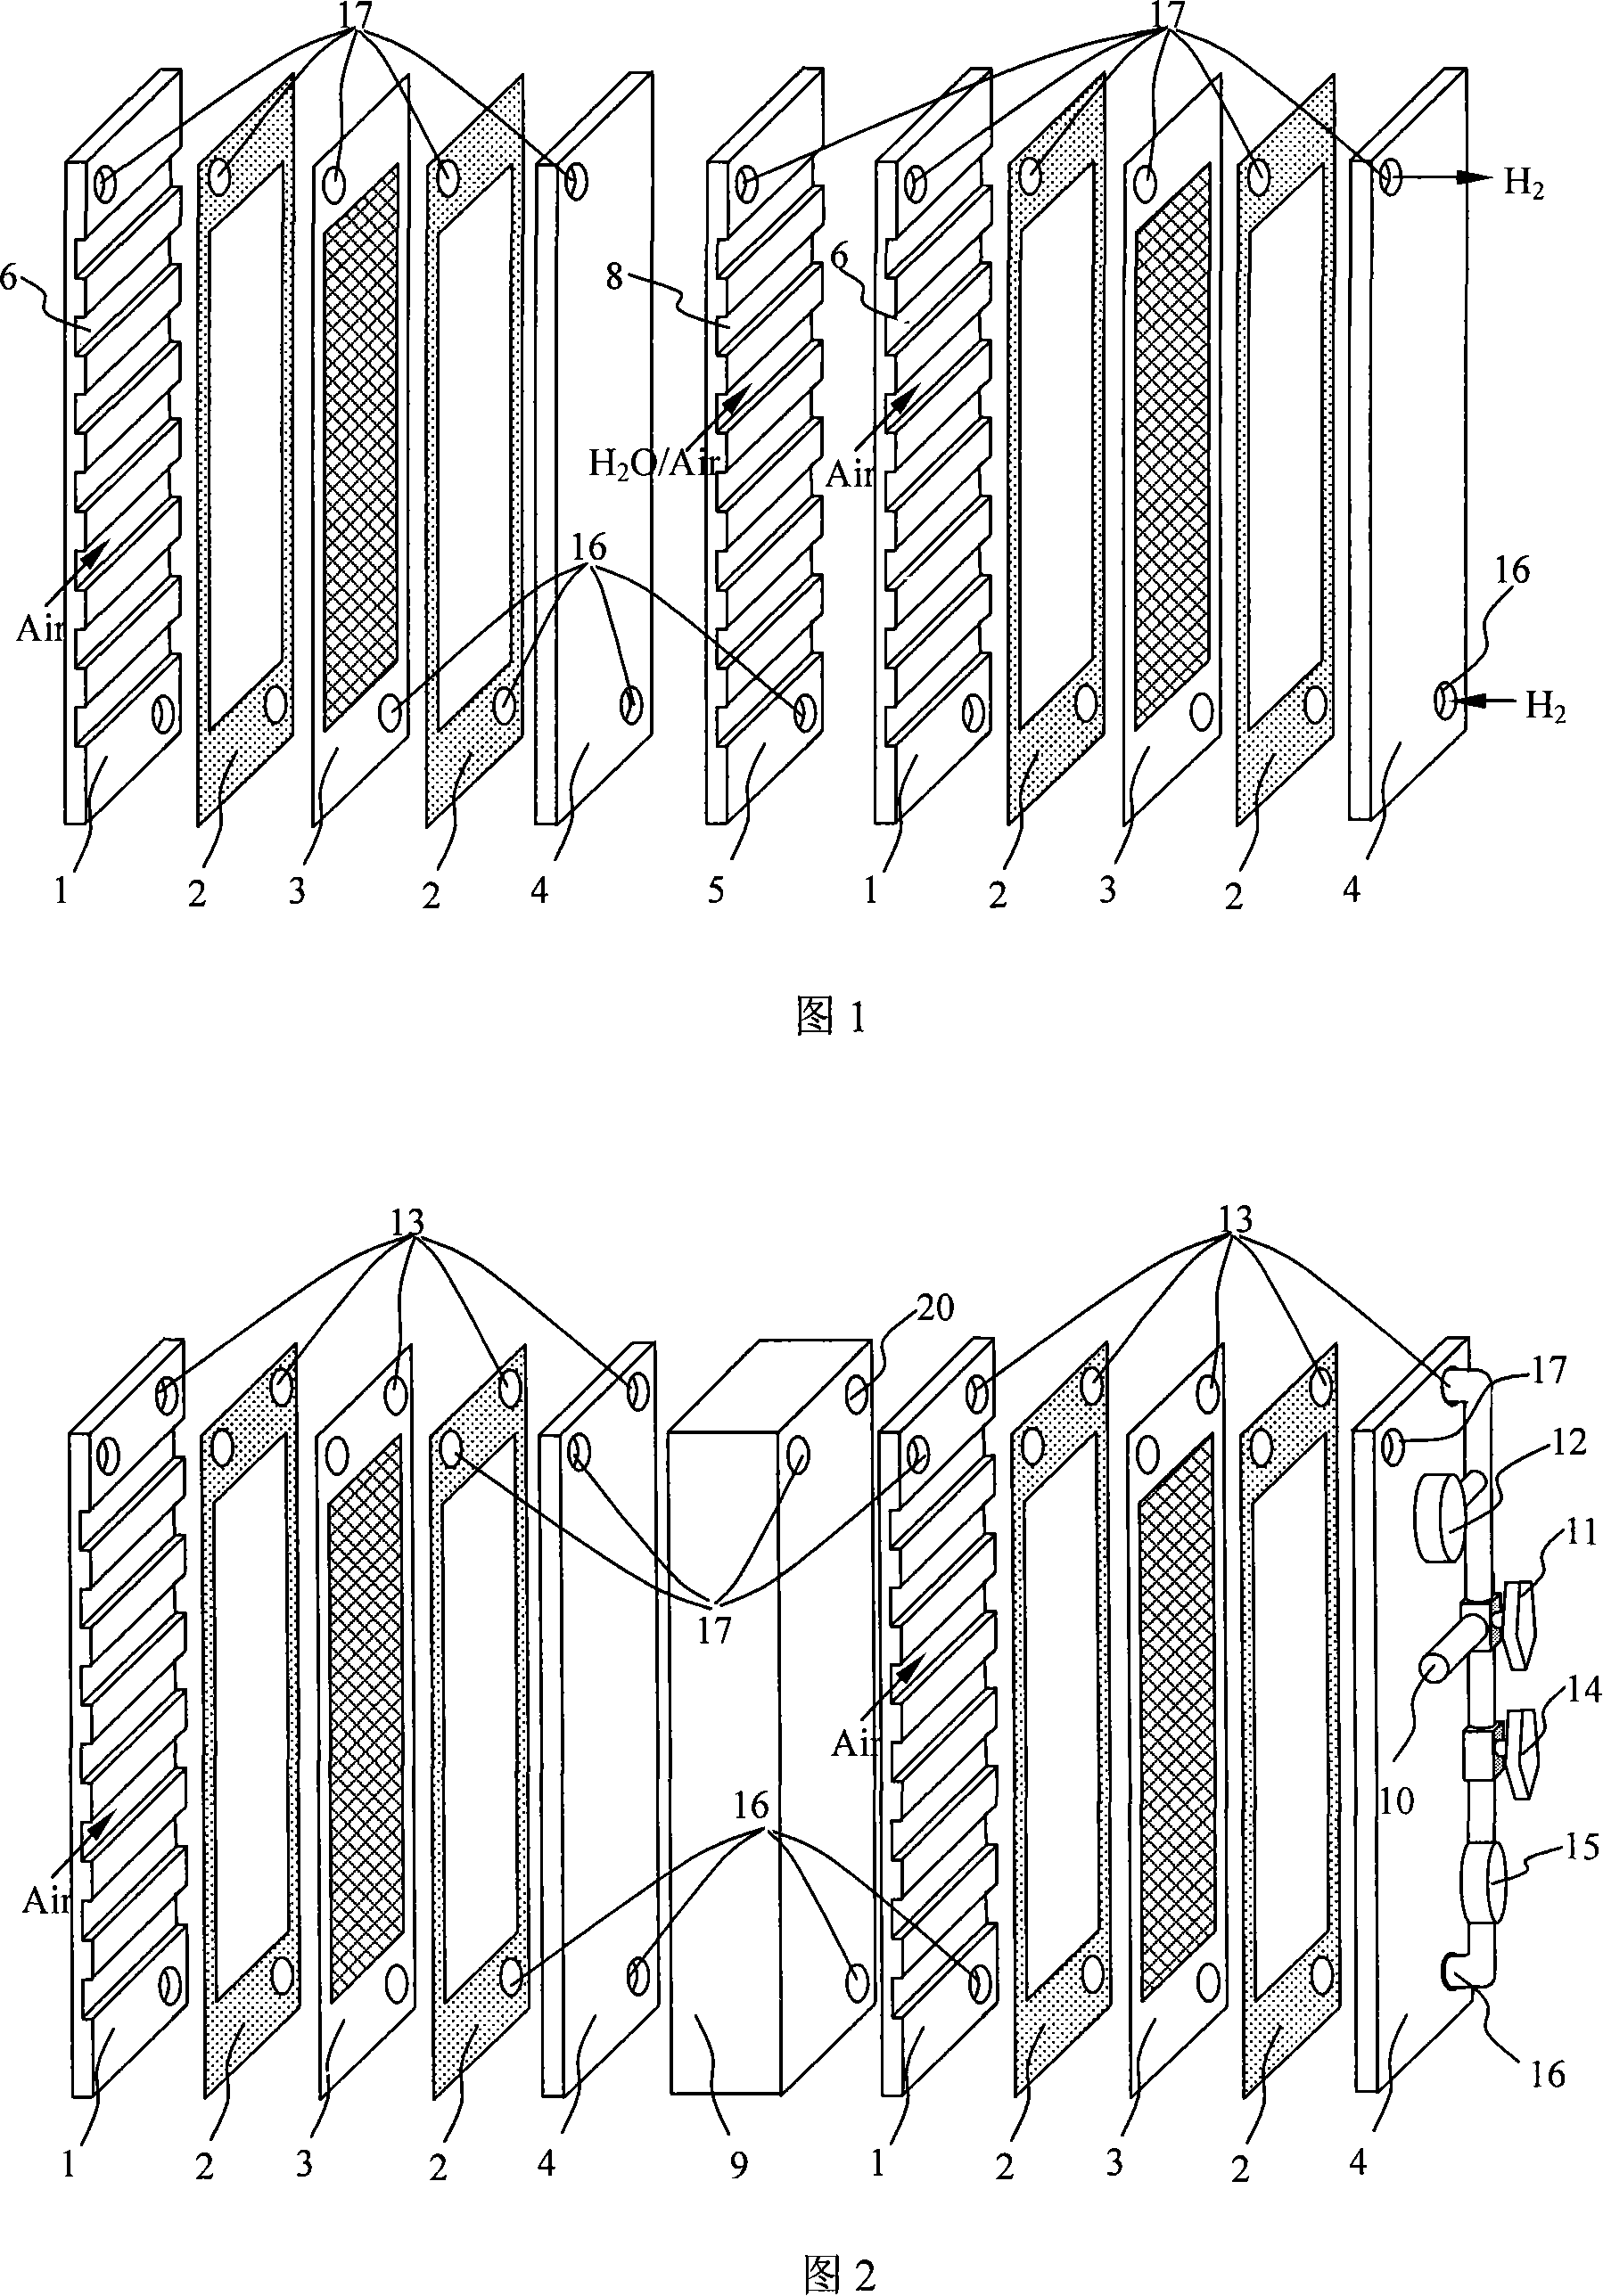 Fuel cell coupling with hydrogen storing unit